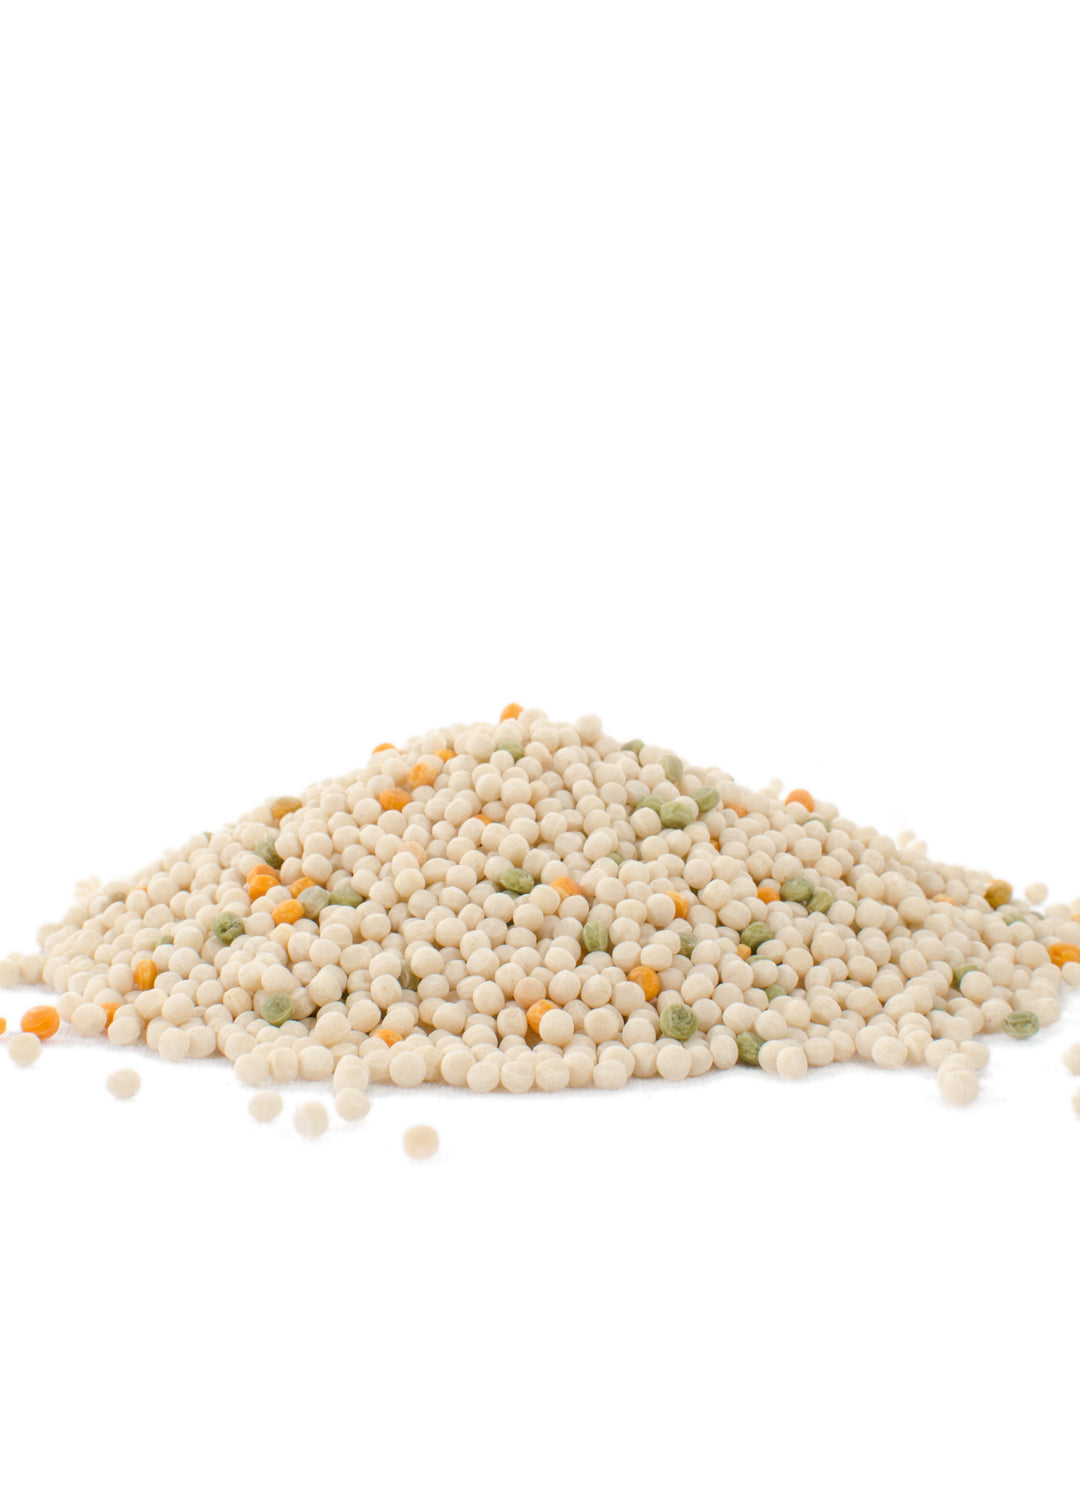 Bob's Red Mill Natural Foods Inc Couscous Tri-Color Pearl-16 oz.-4/Case